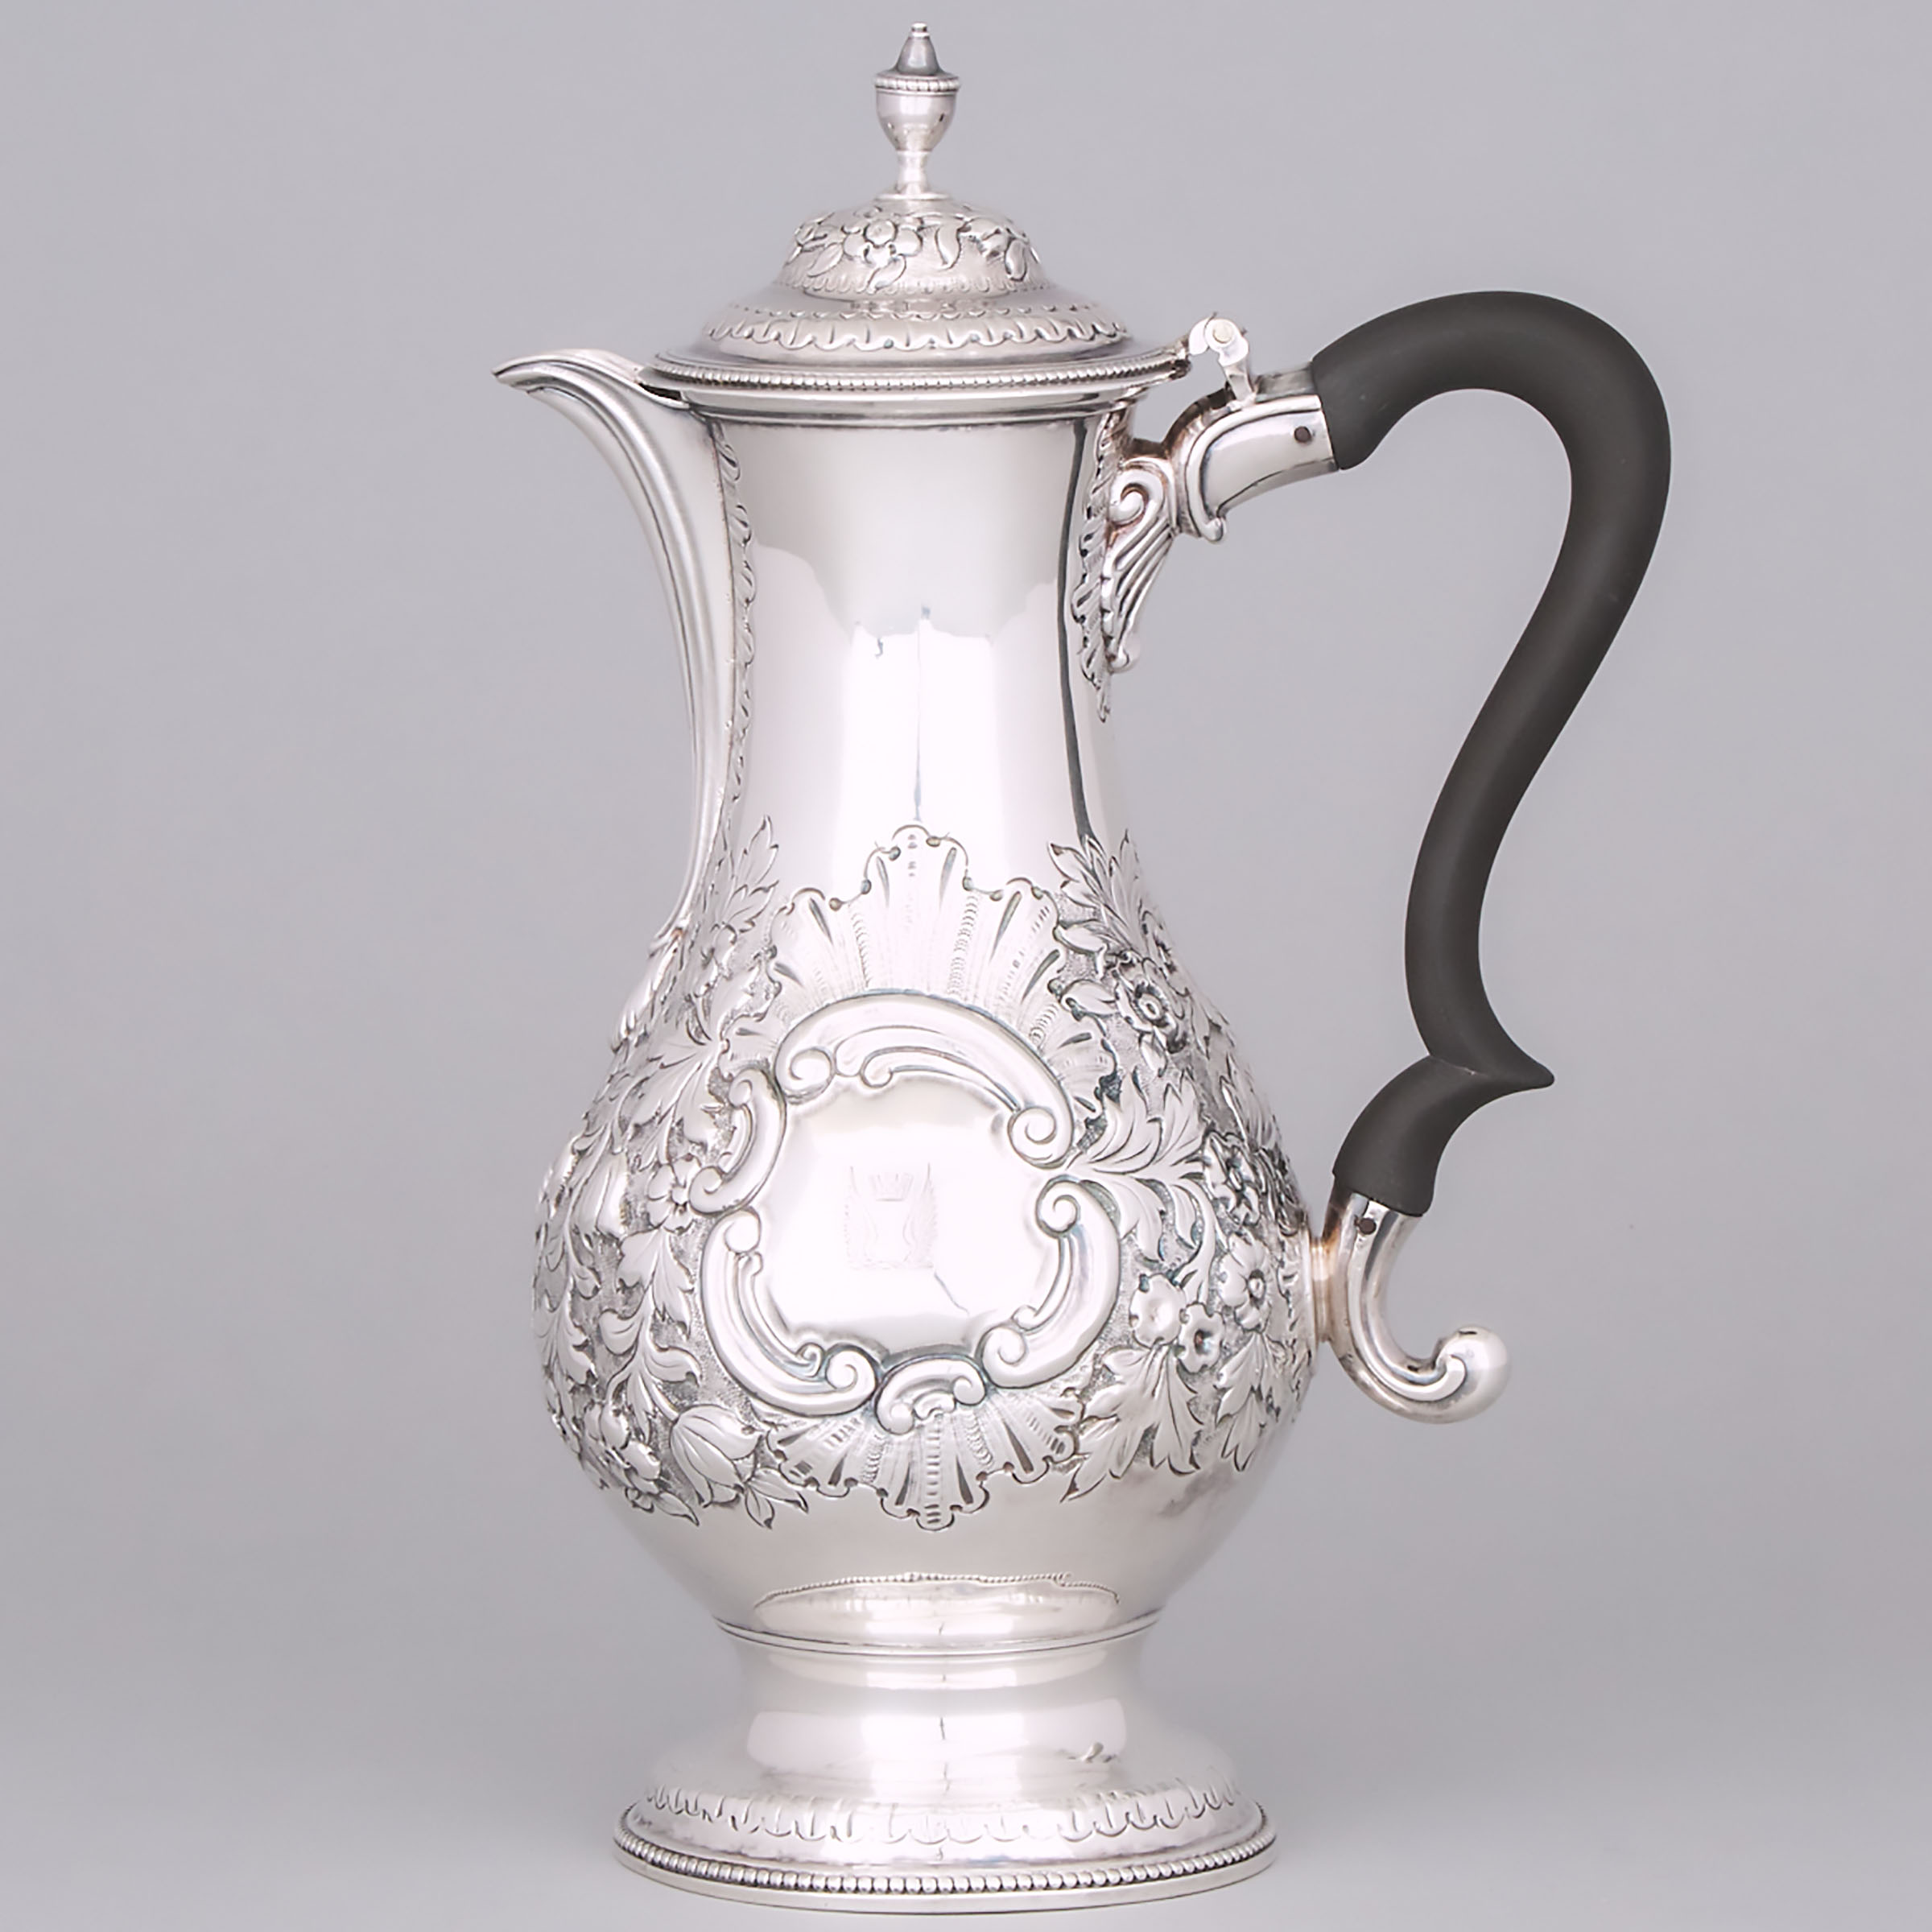 George III Silver Hot Water Pot, Charles Wright, London, 1779